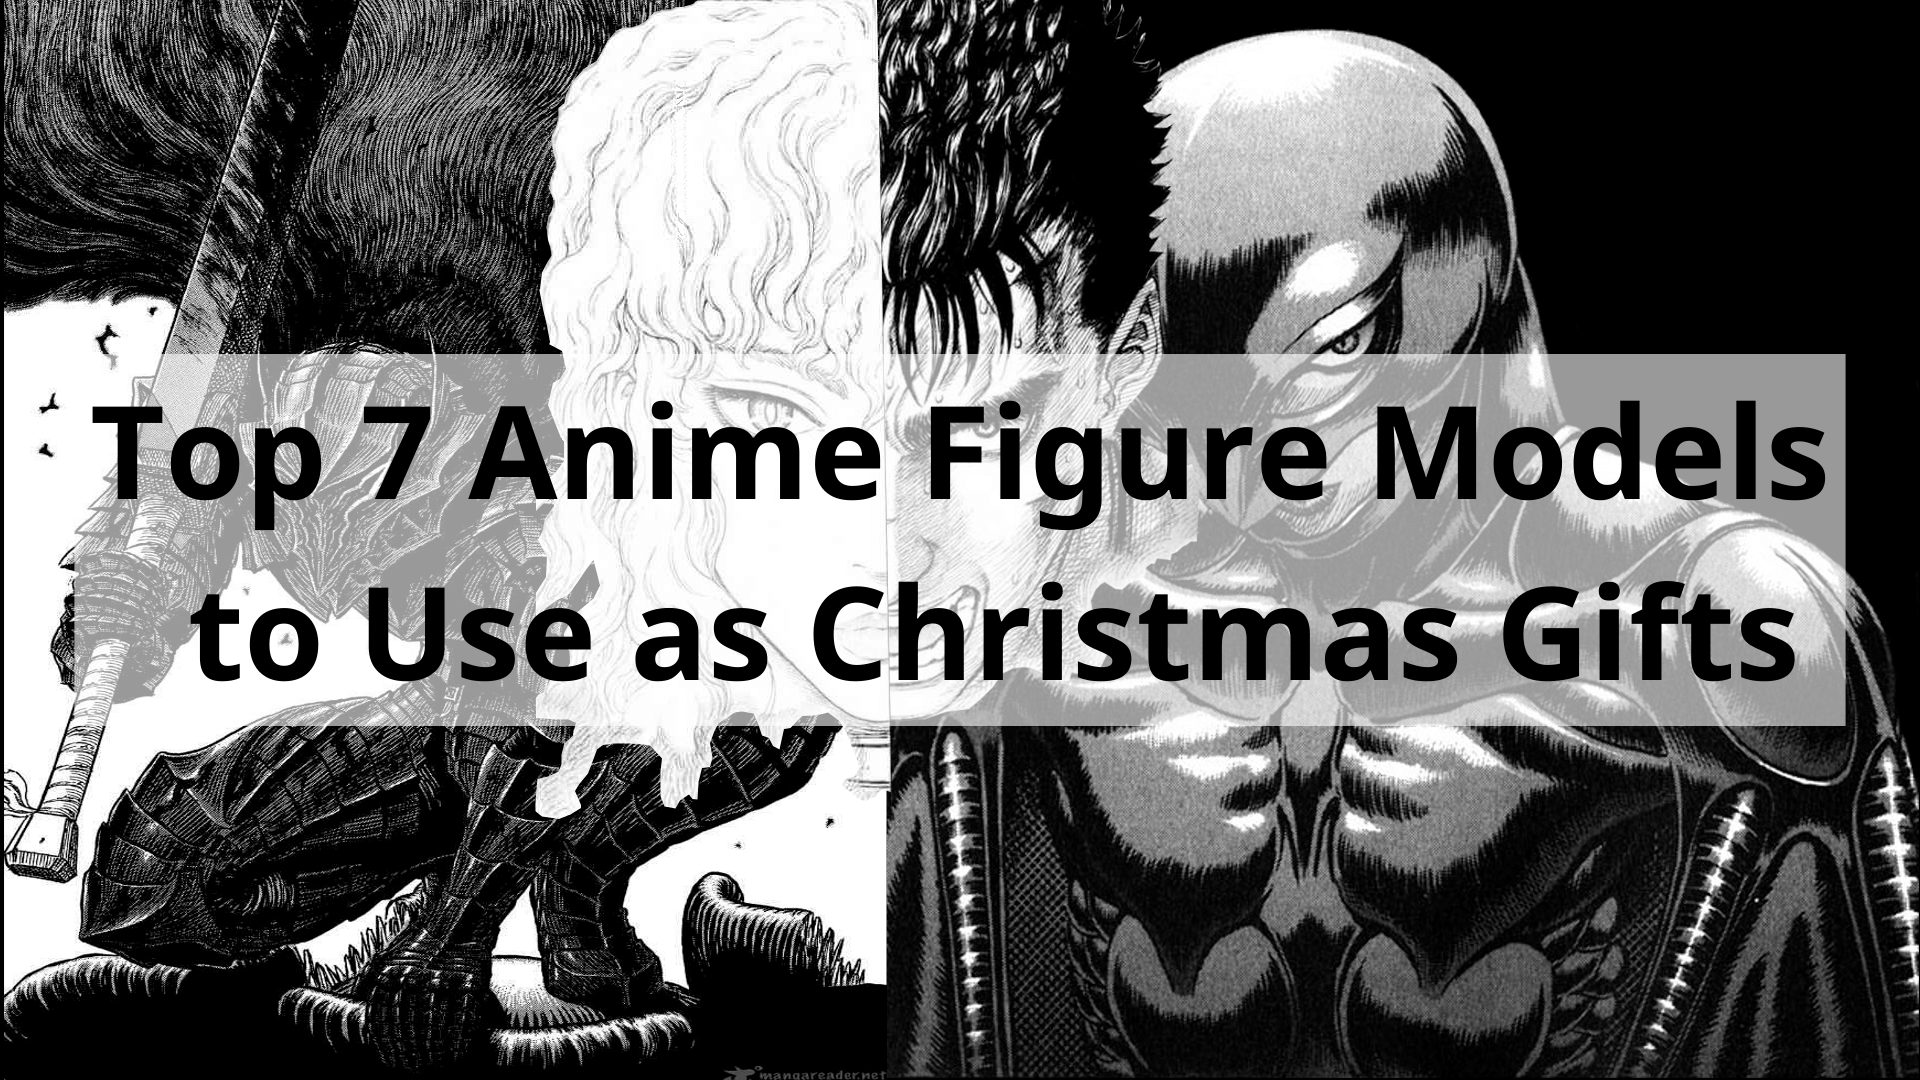 Top 7 Anime Figure Models to Use as Christmas Gifts